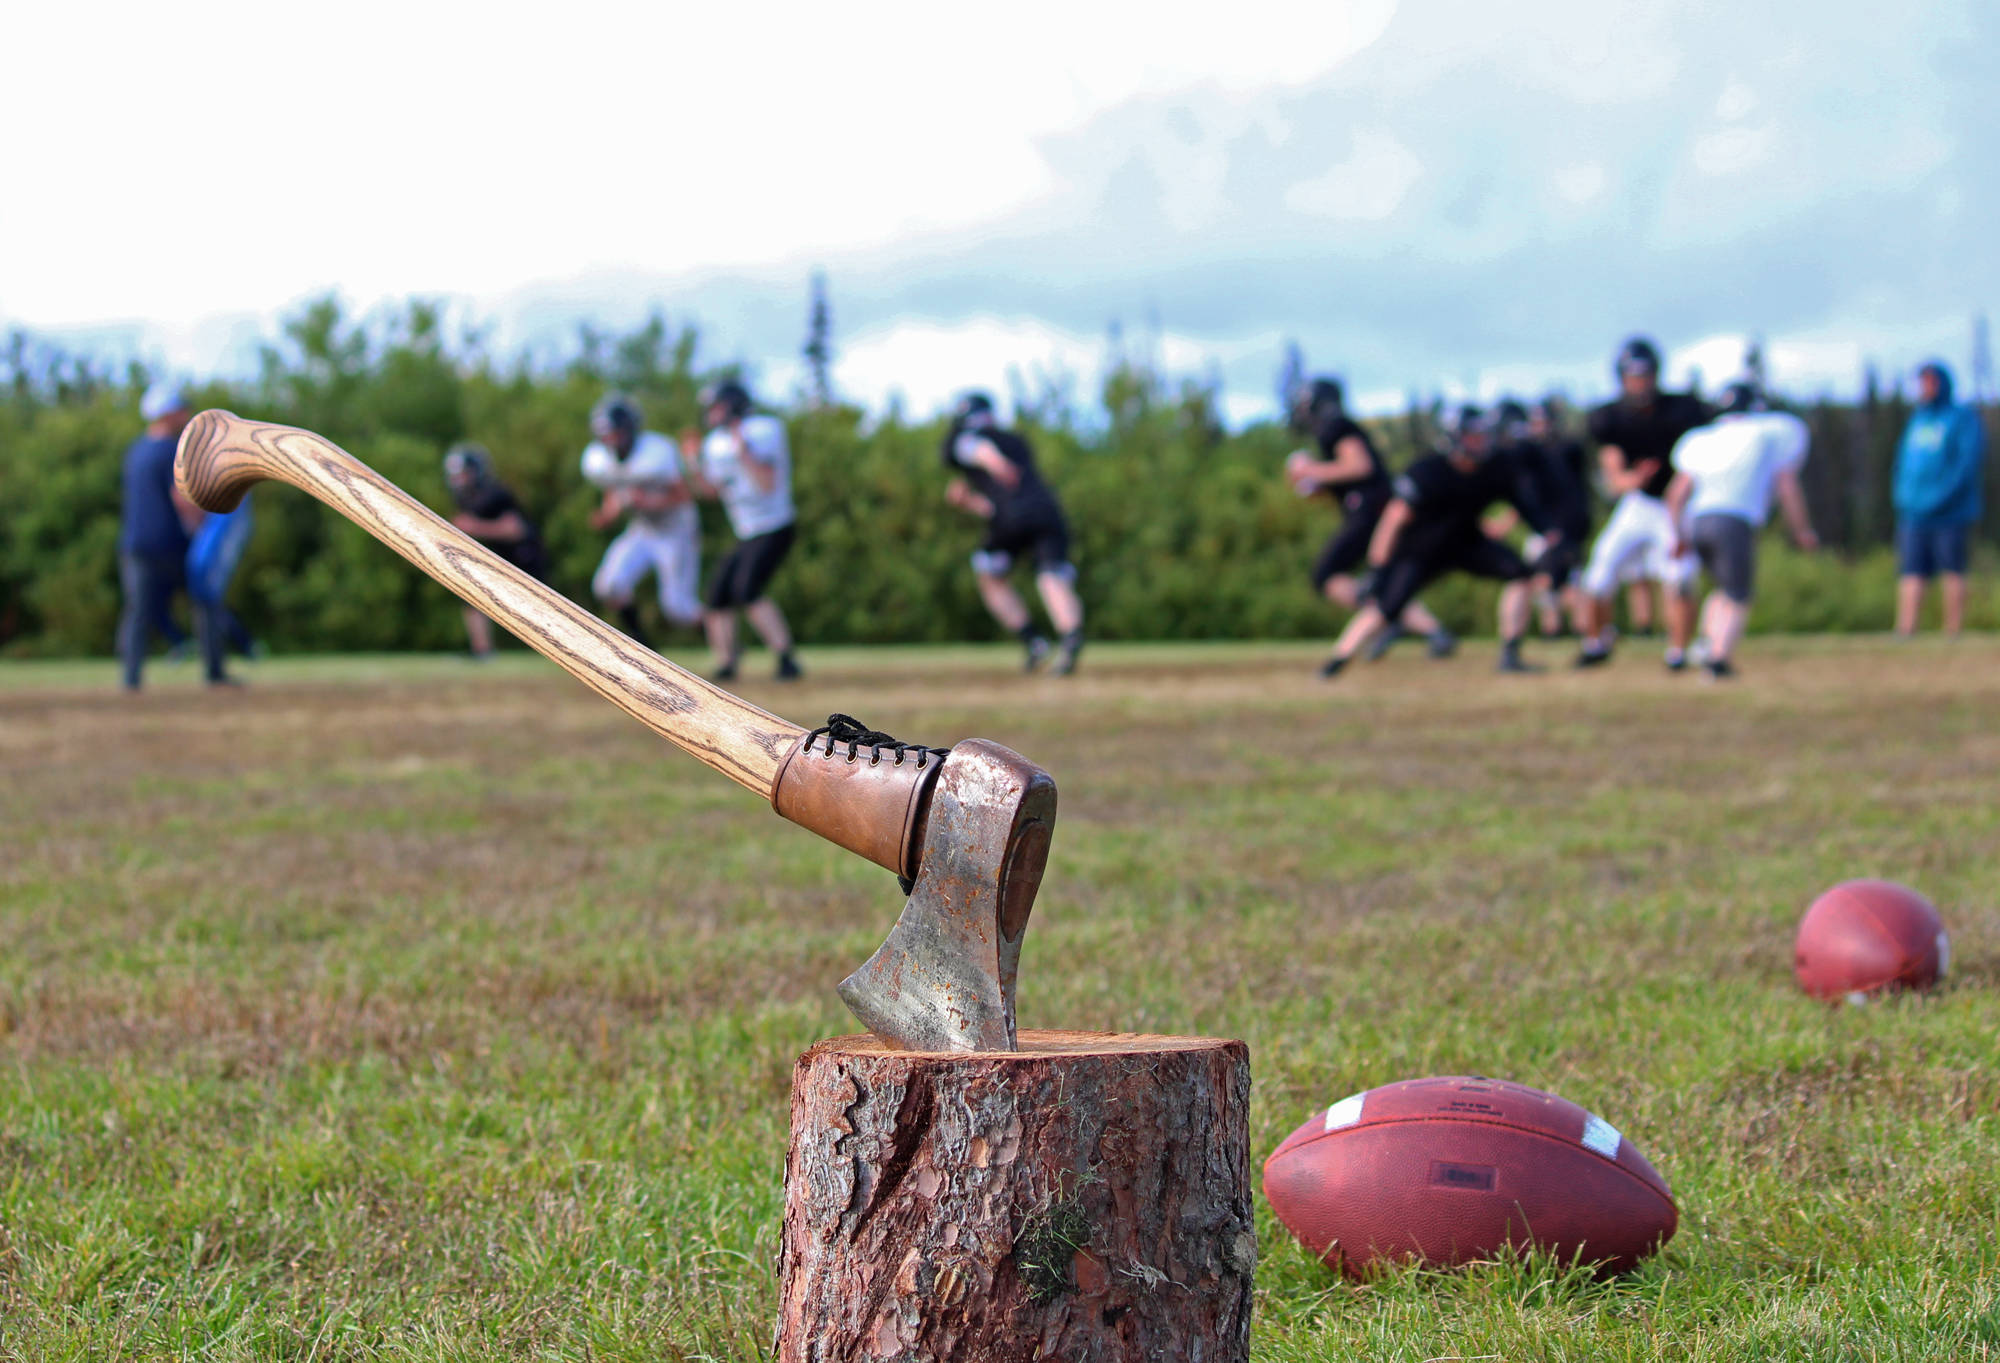 Members of the Cougars football team, made up of players from three Russian Old Believer schools, practice in a field Friday, Sept. 1, 2017 in a field behind McNeil Canyon Elementary in Fritz Creek, Alaska. The axe stuck in the stump in the foreground is a new tradition started this year by Head Coach Justin Zank. He tells his players to “be the axe.” (Photo by Megan Pacer/Homer News)